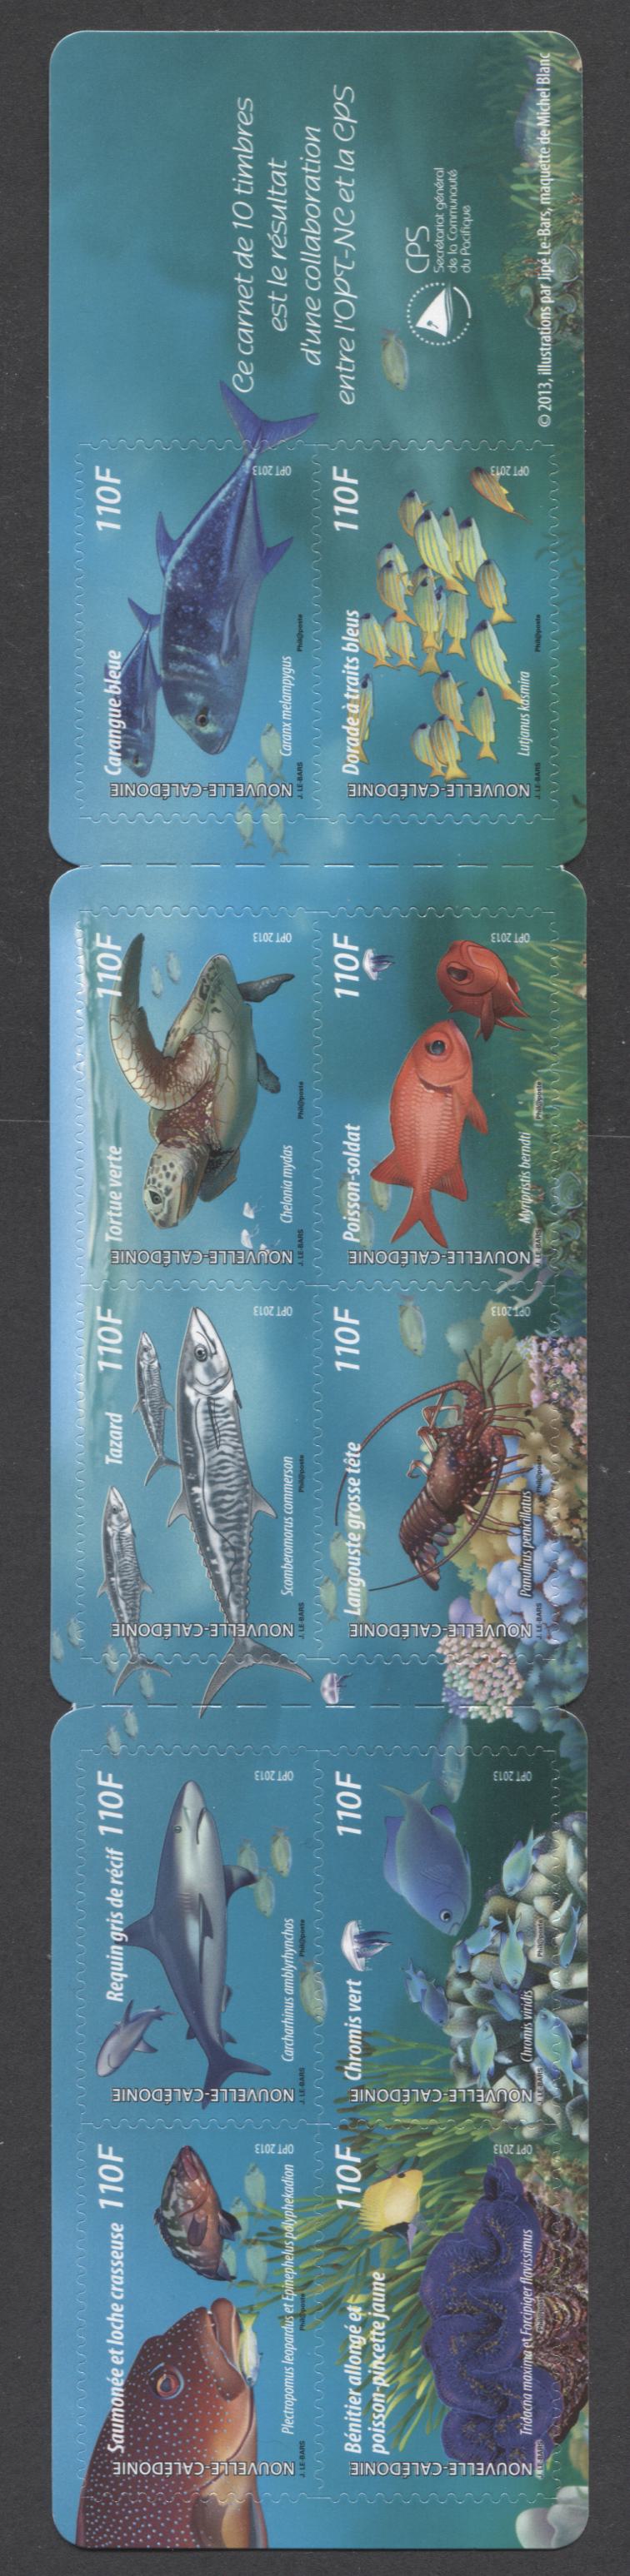 Lot 133 New Caledonia SC#1156 110f Multicolored 2013 Marine Life In Lagoons Issue, A VFNH Unfolded Booklet Of 10, Click on Listing to See ALL Pictures, 2017 Scott Cat. $25